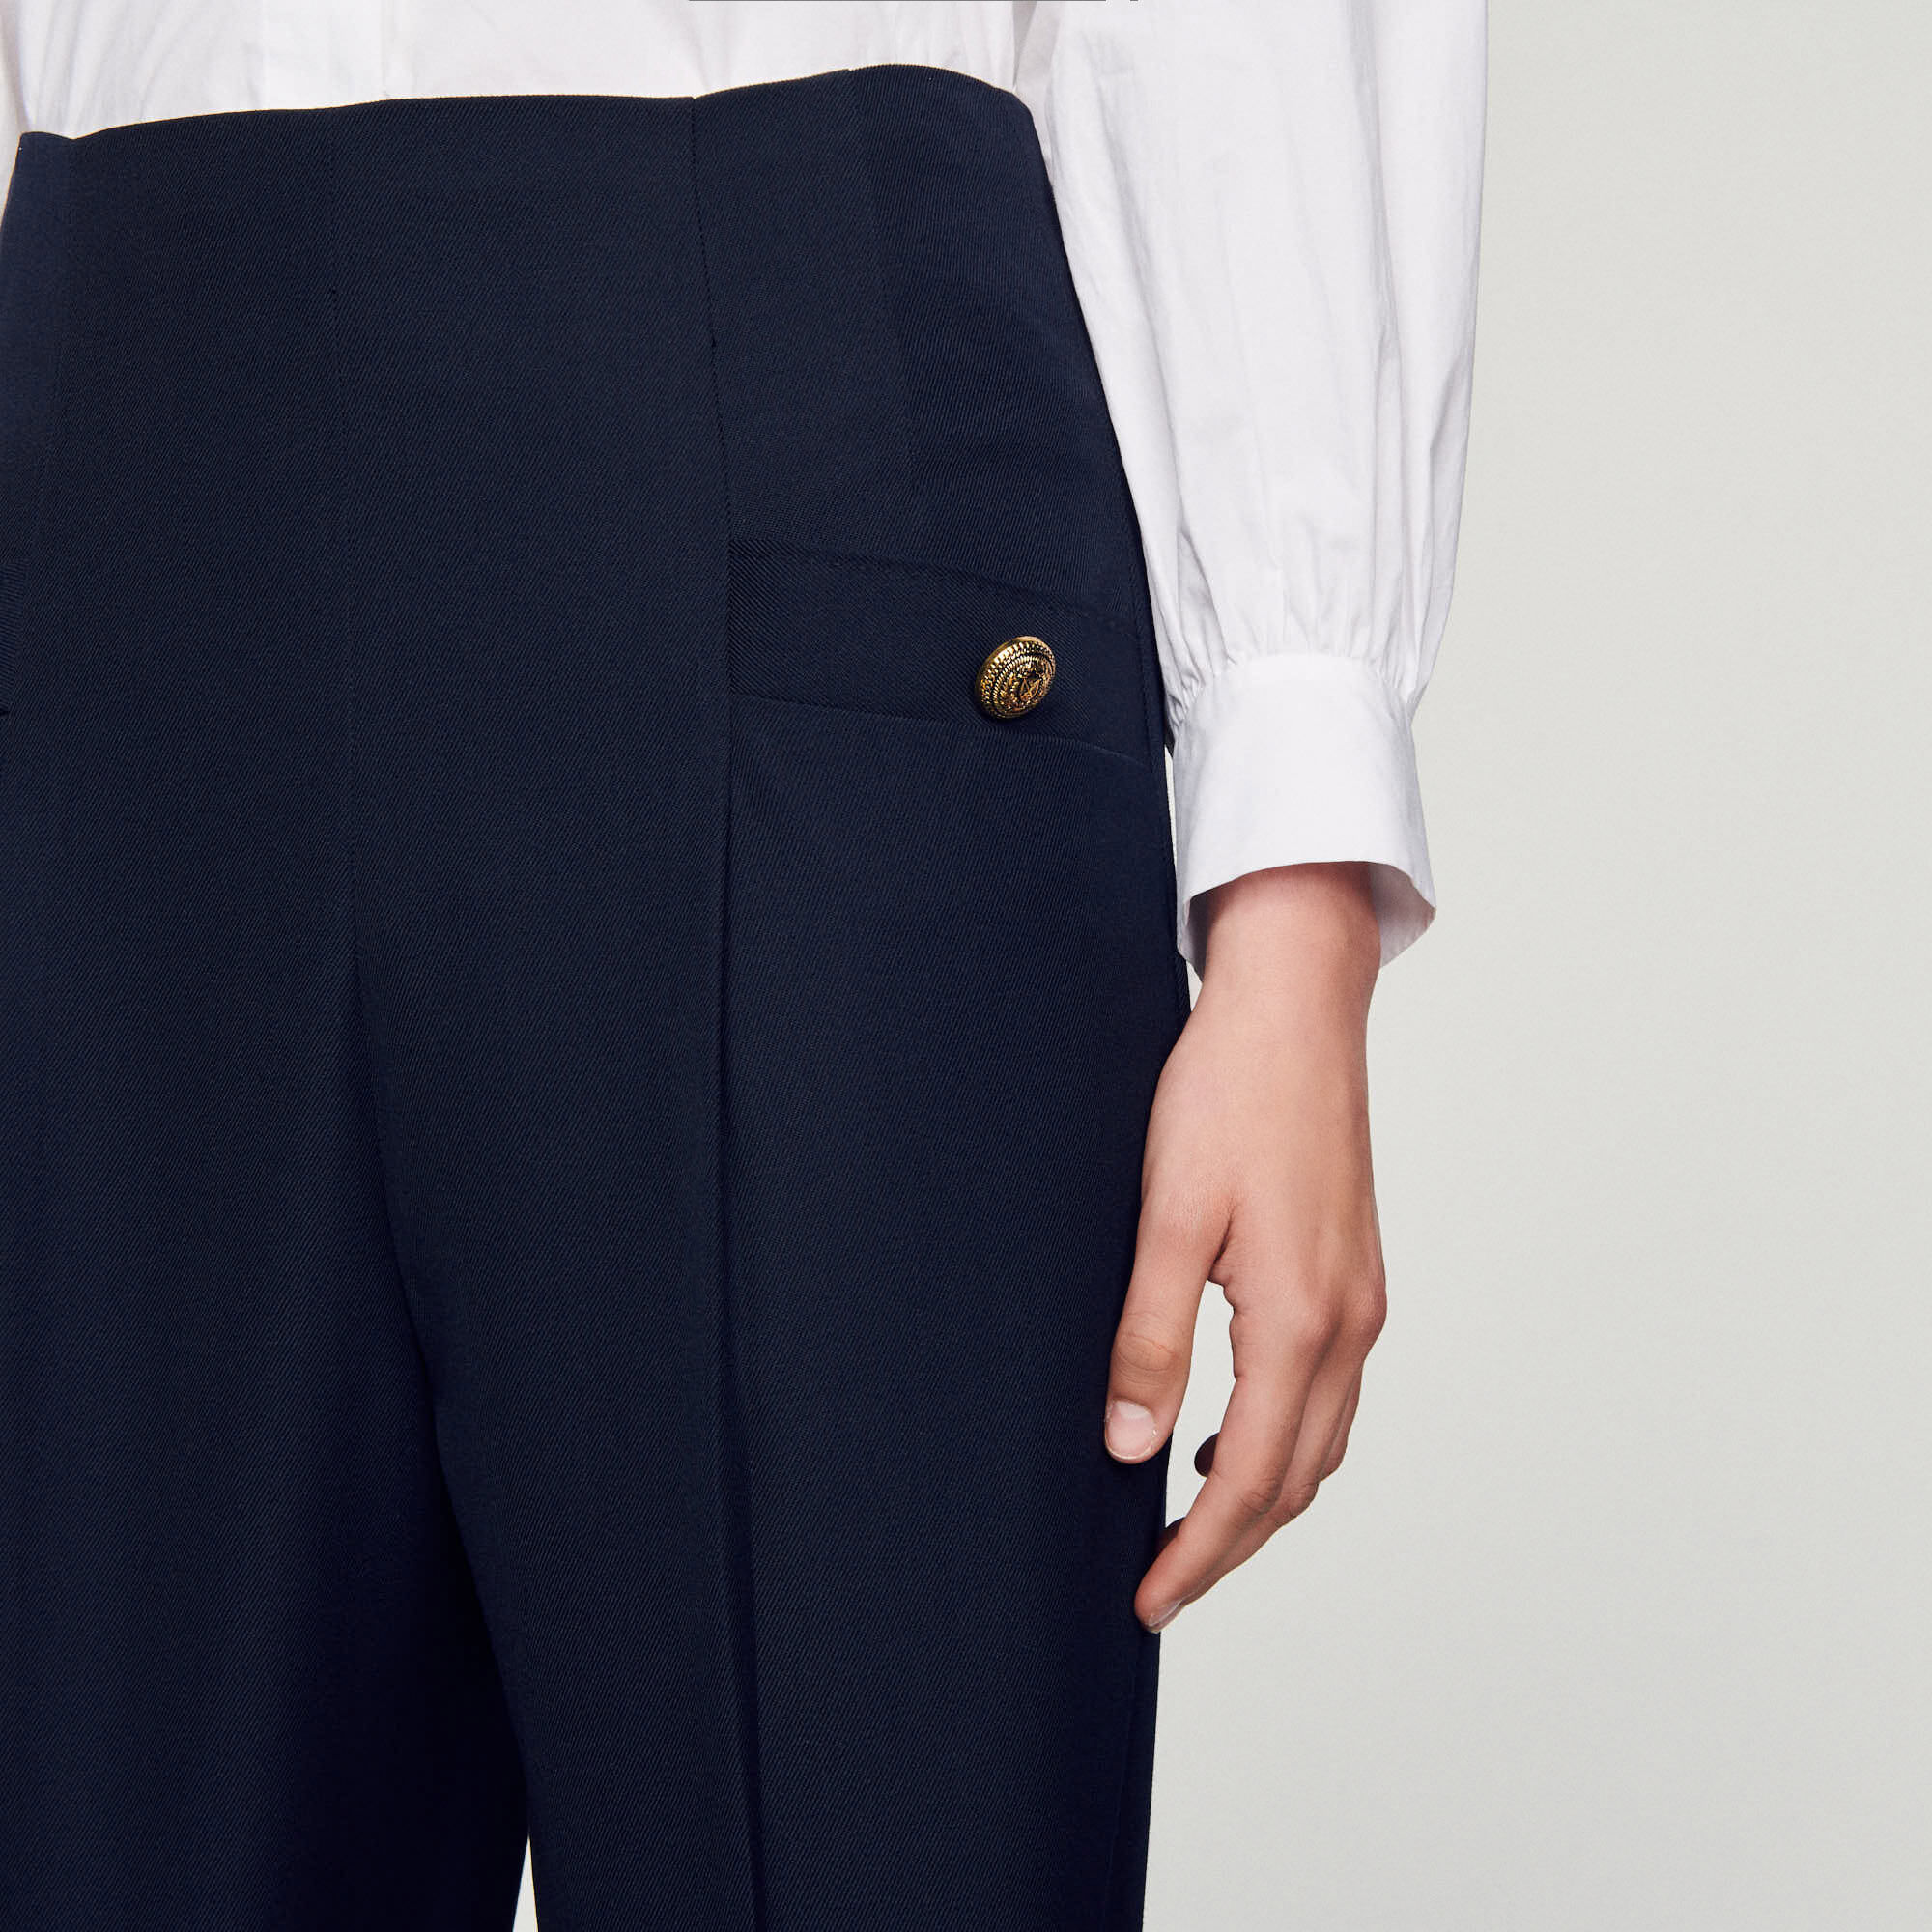 Wide-leg pants Select a size and Login to add to Wish list